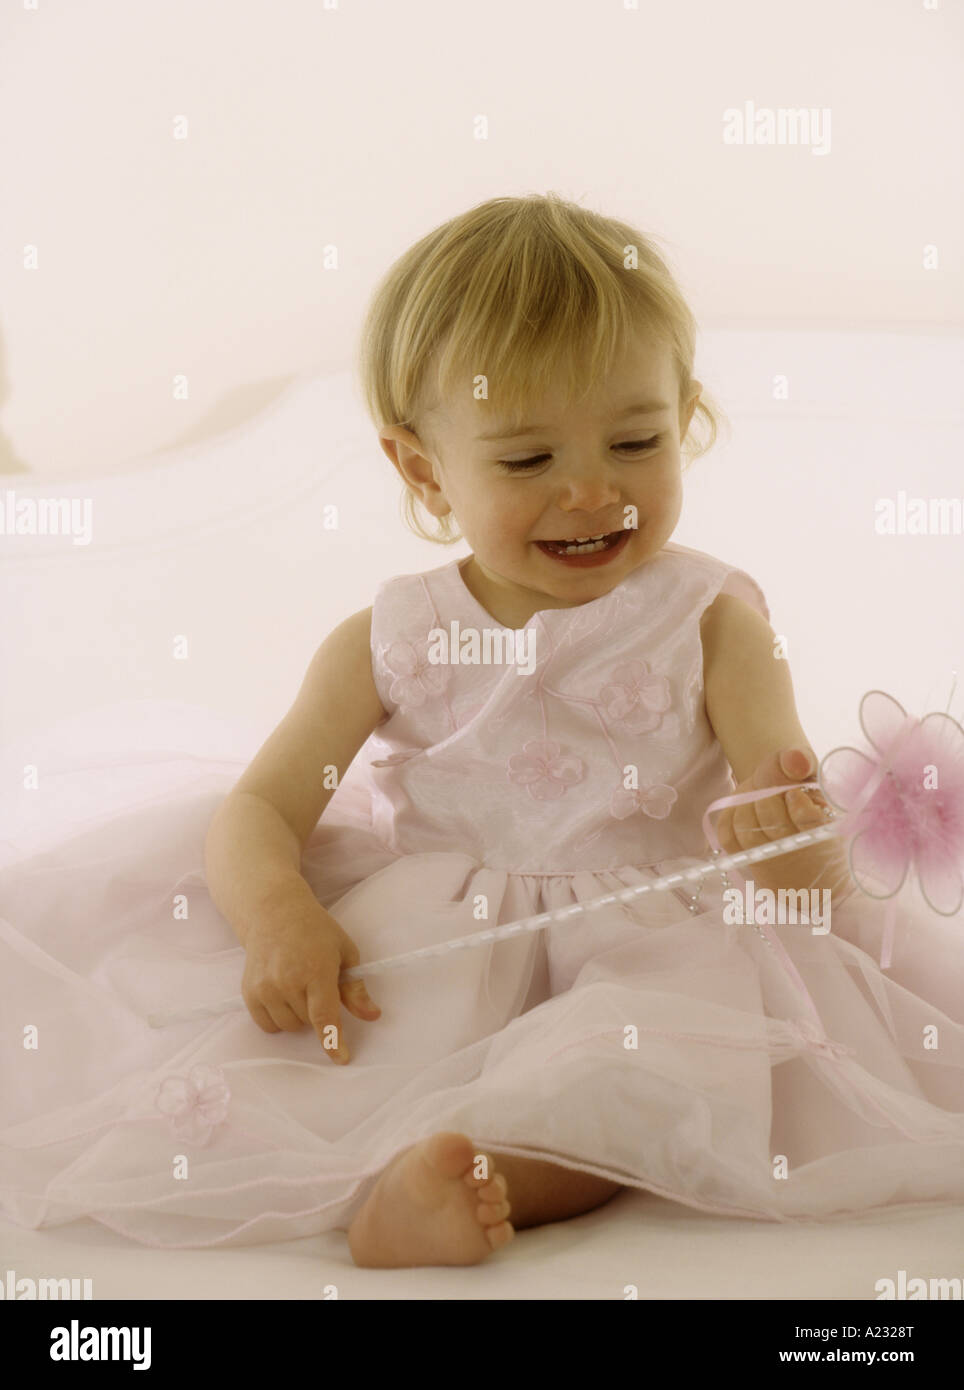 Toddler wearing a pink party dress holding a wand Stock Photo